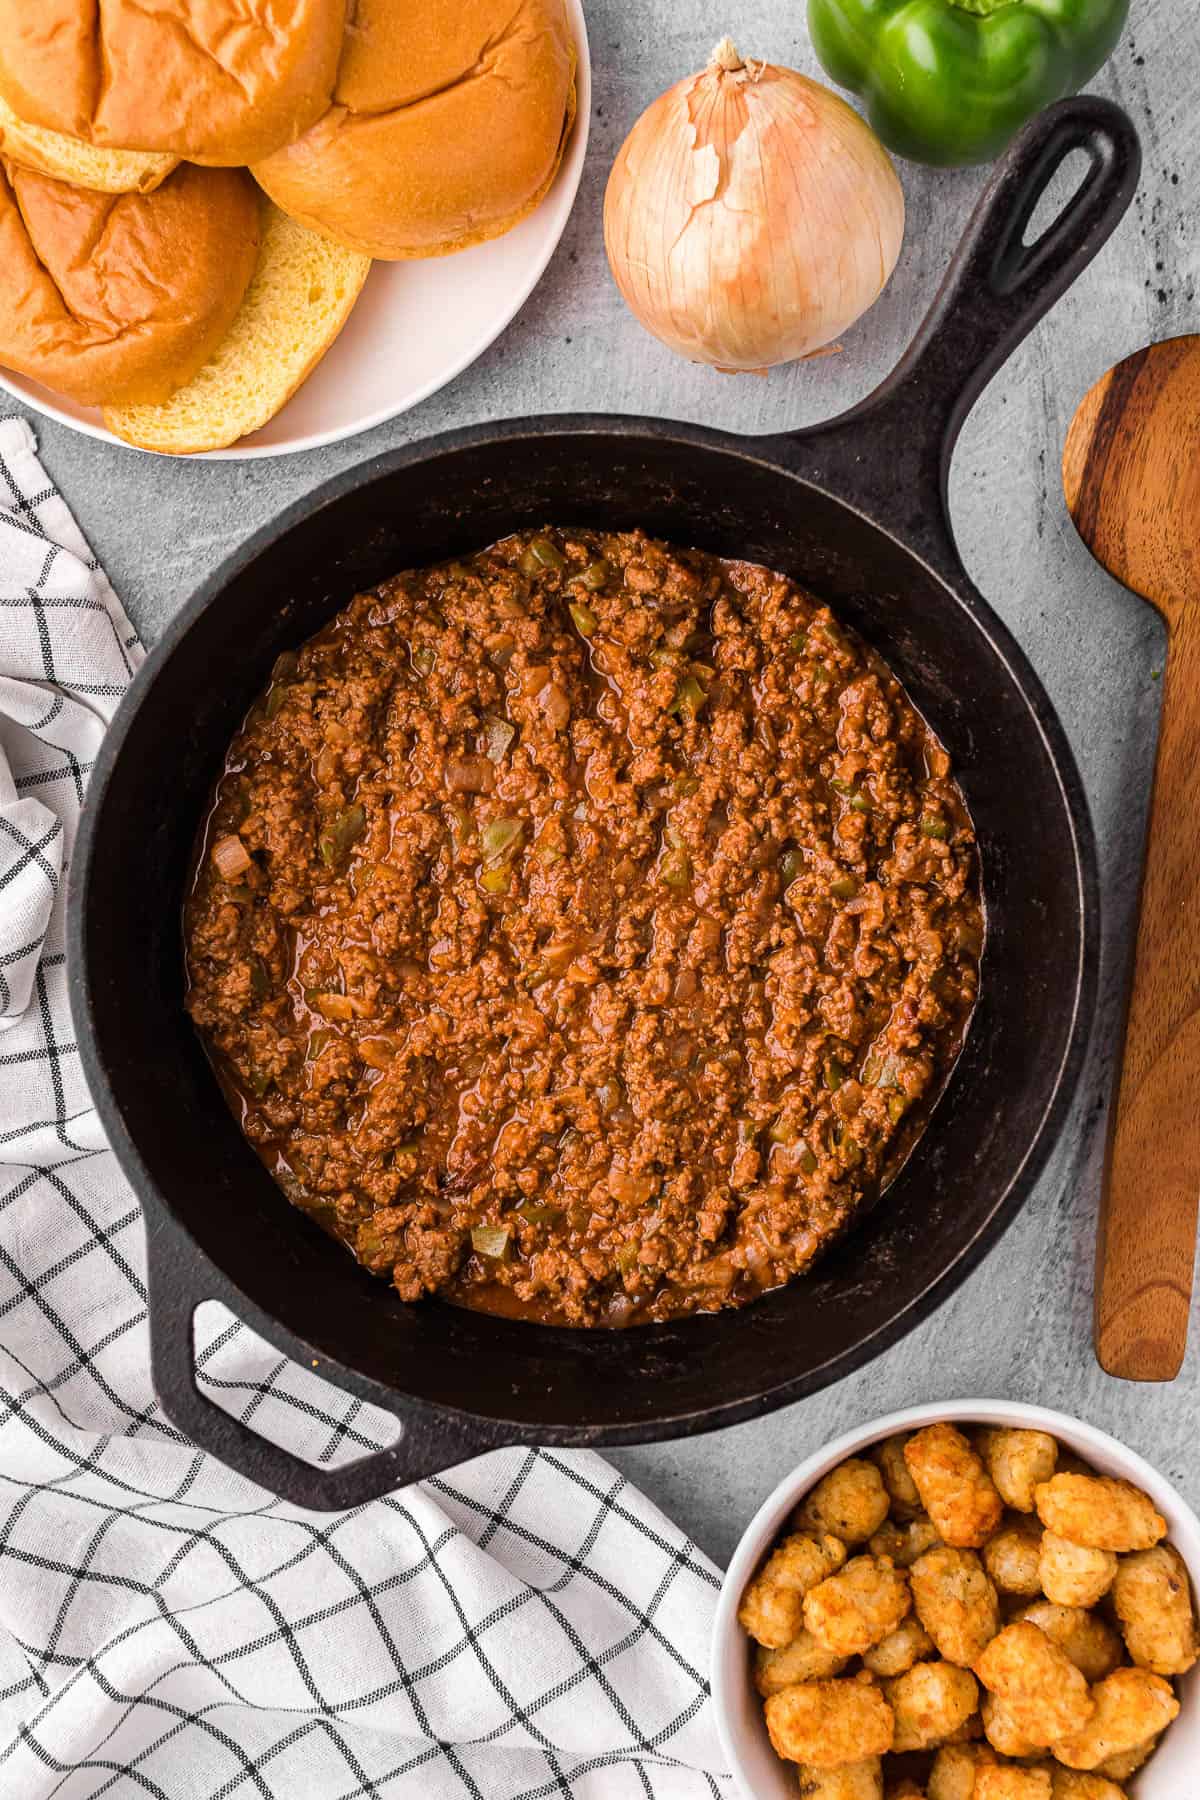 Cooking sloppy joes in a cast iron skillet for an easy dinner.